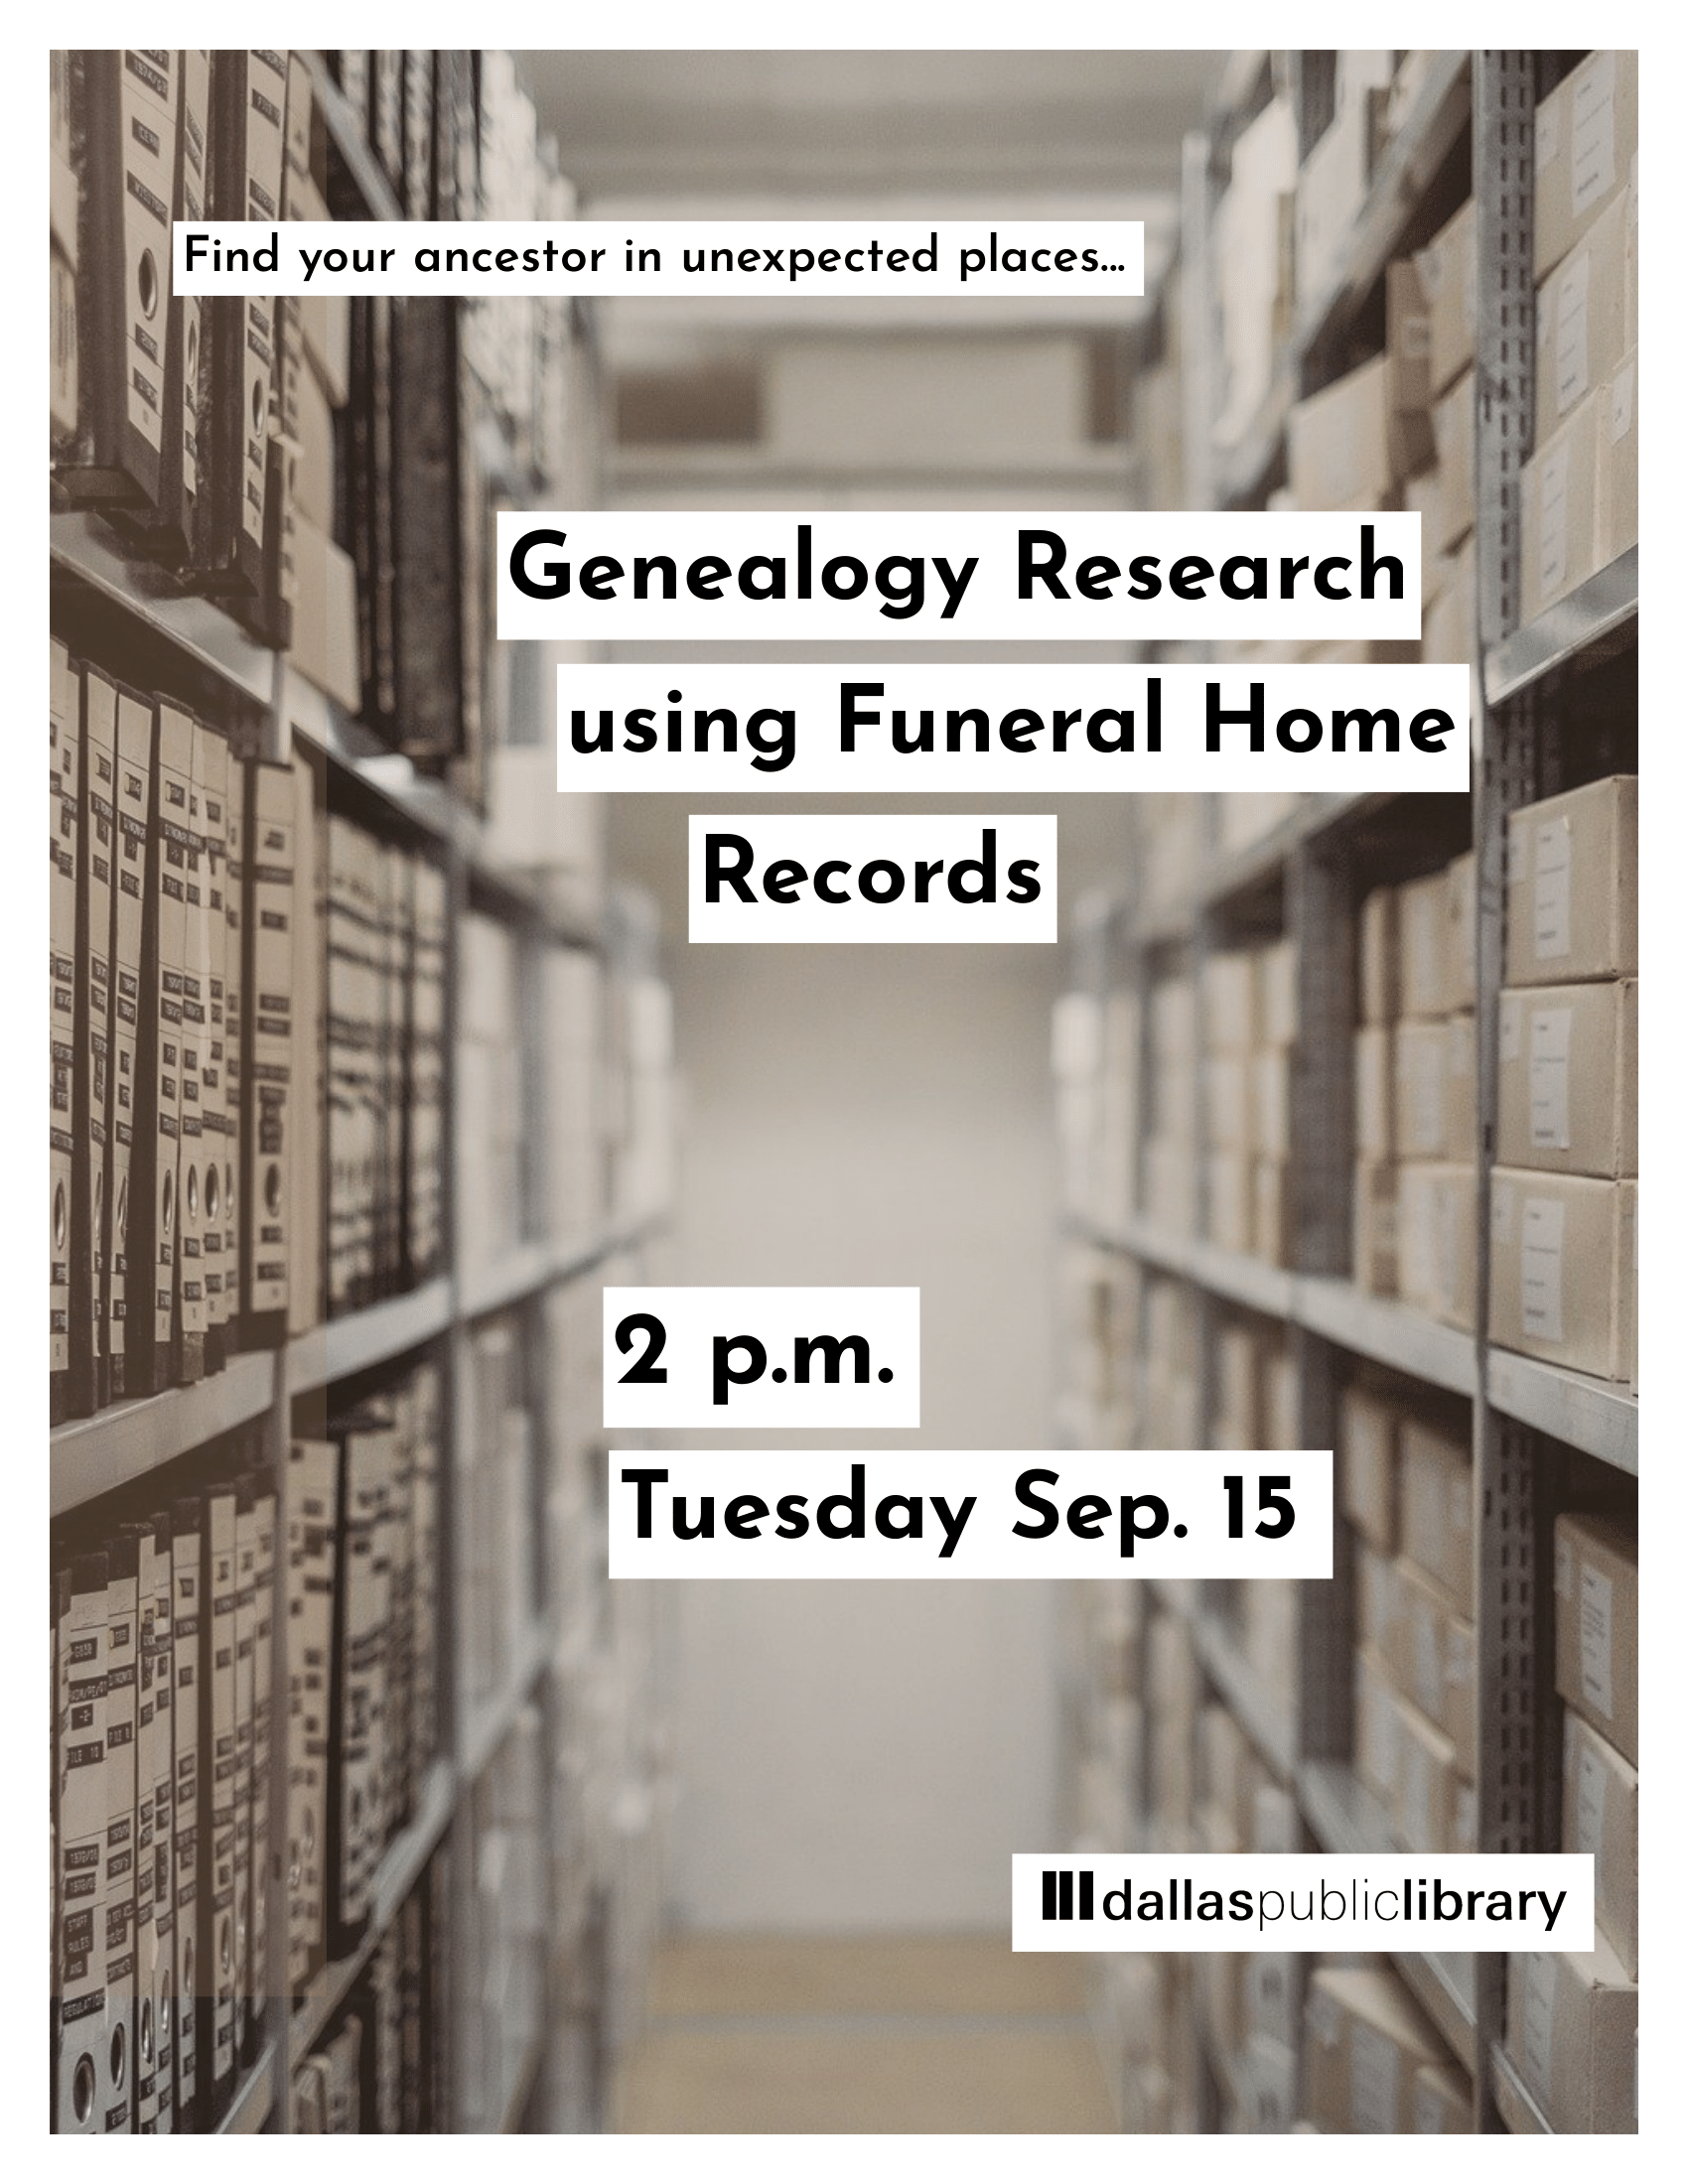 Genealogy Research using Funeral Home Records